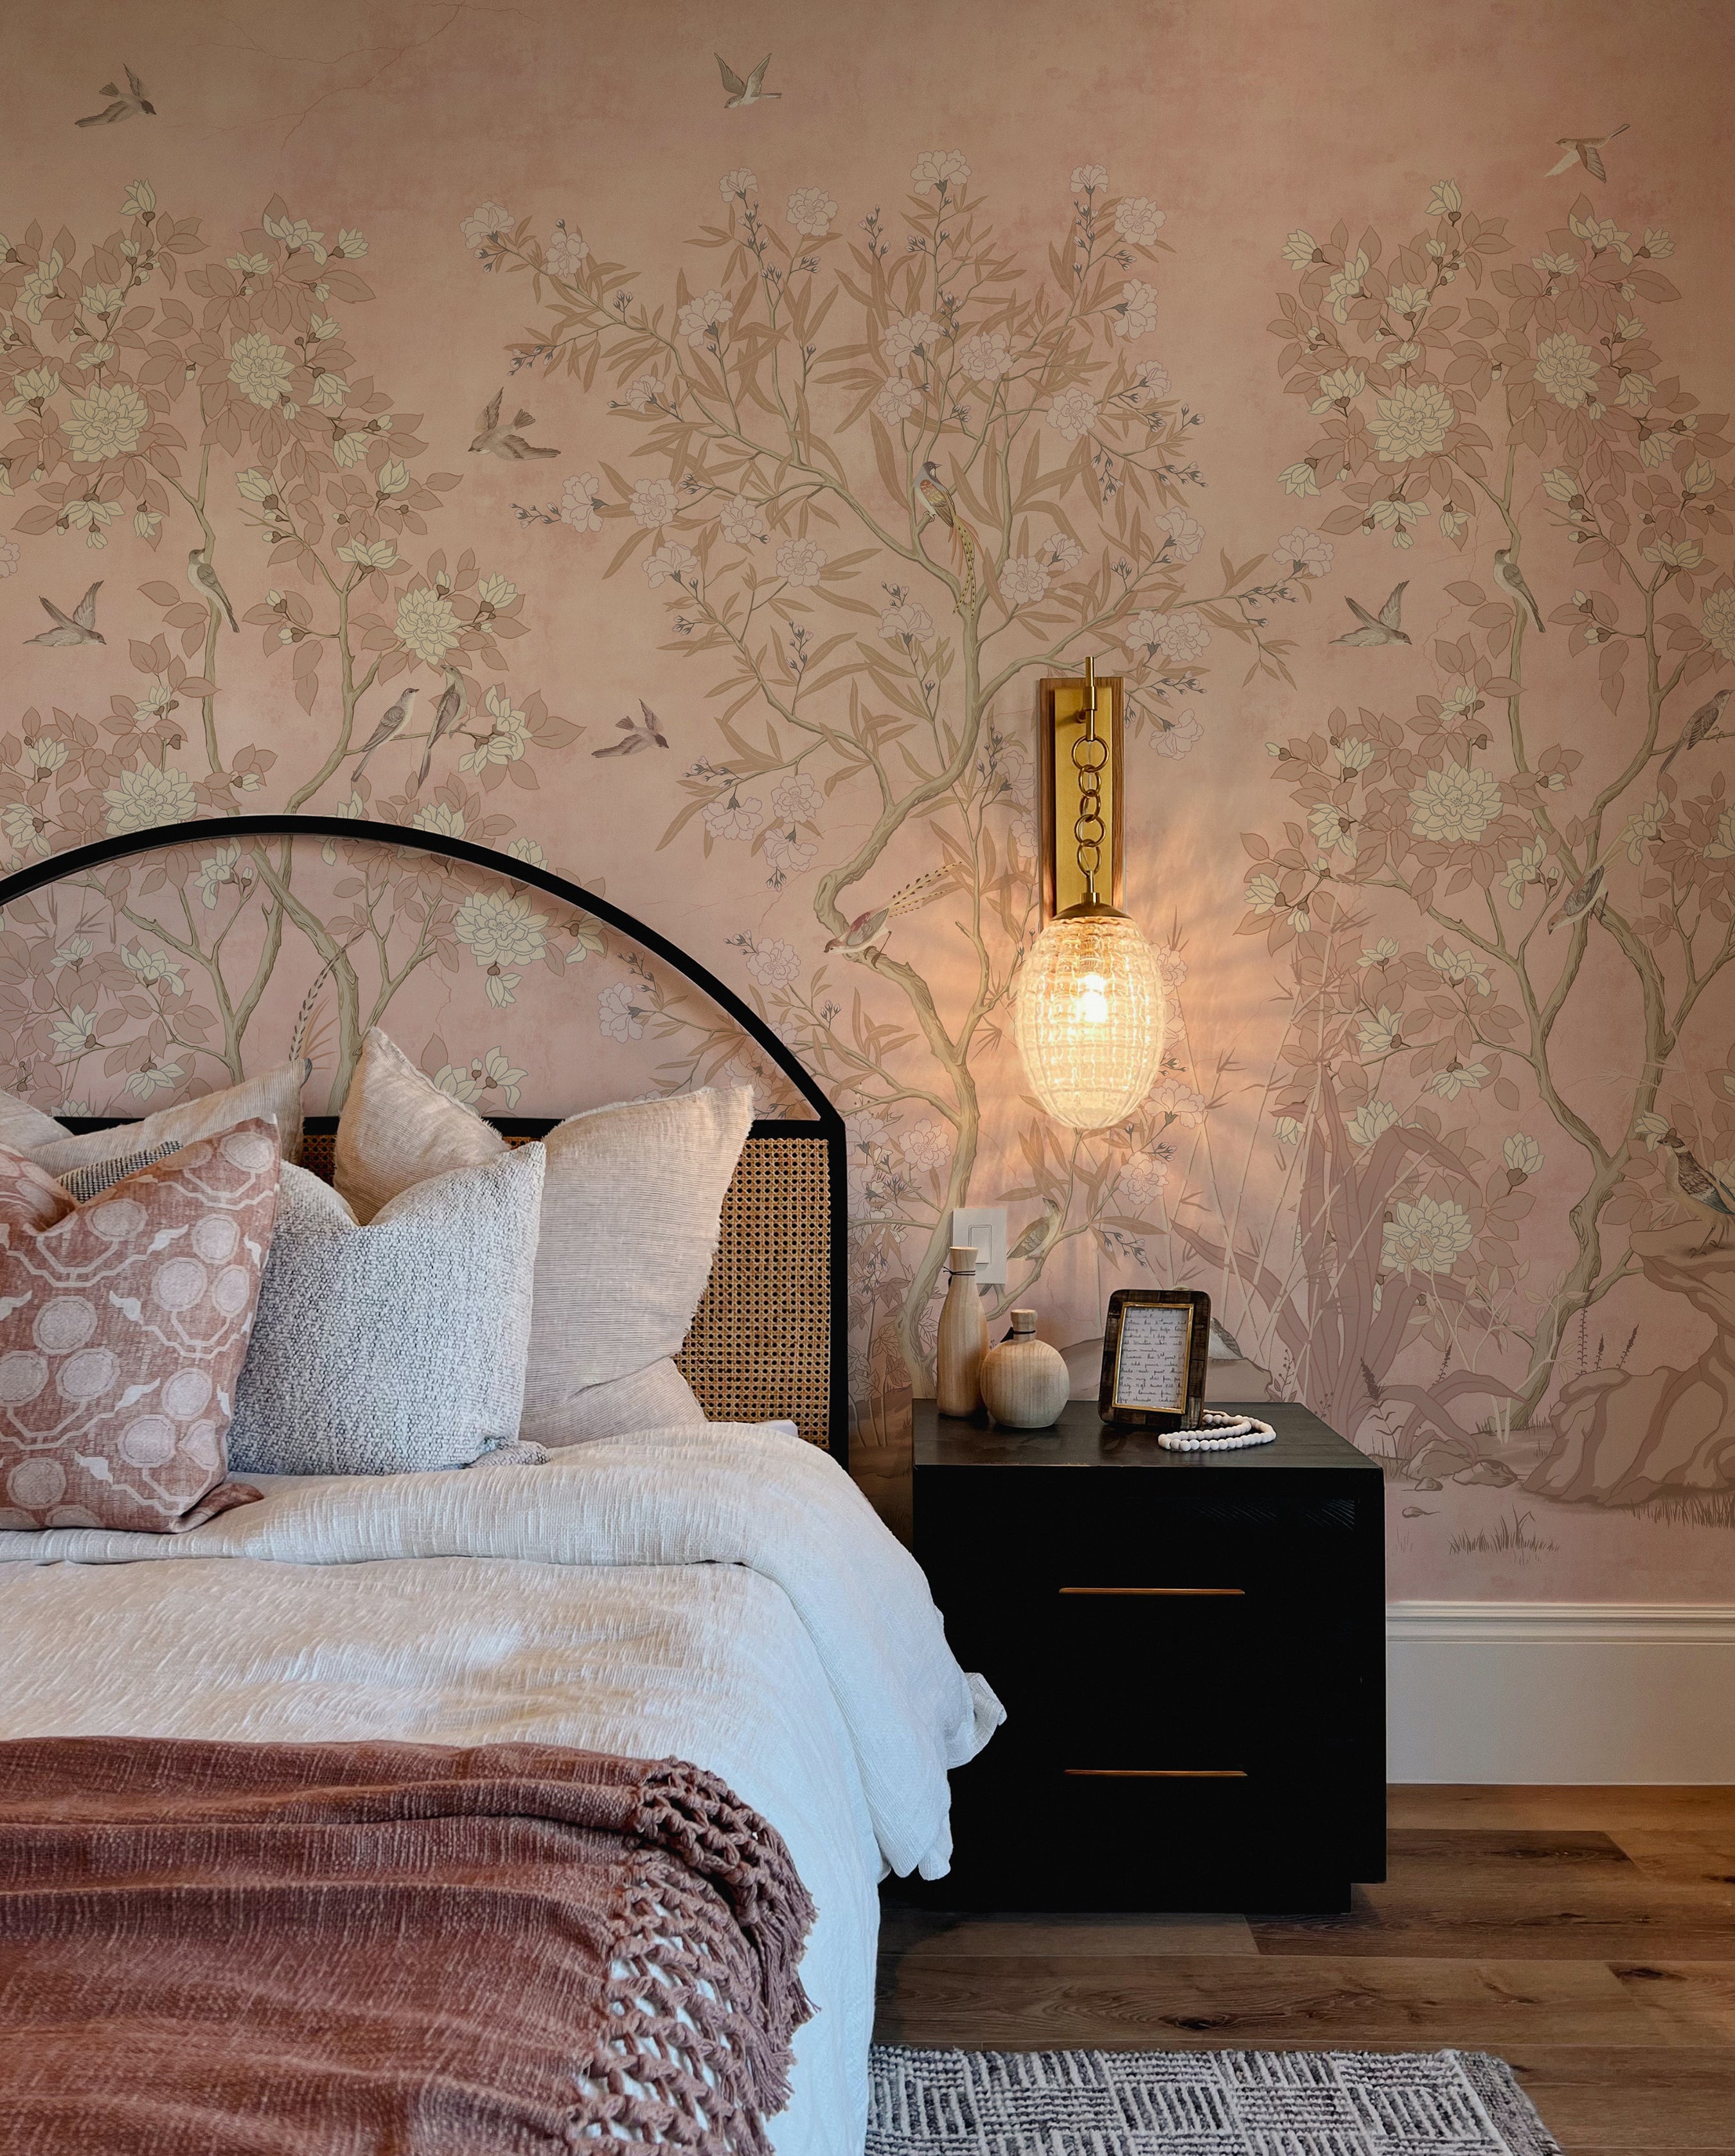 A bedroom featuring chinoiserie wallpaper with a delicate design of trees, blooming flowers, and birds in soft colors on a pale pink background, providing a tranquil backdrop to a bed with a dark, arched headboard, layered with textured linens in shades of white and dusty rose